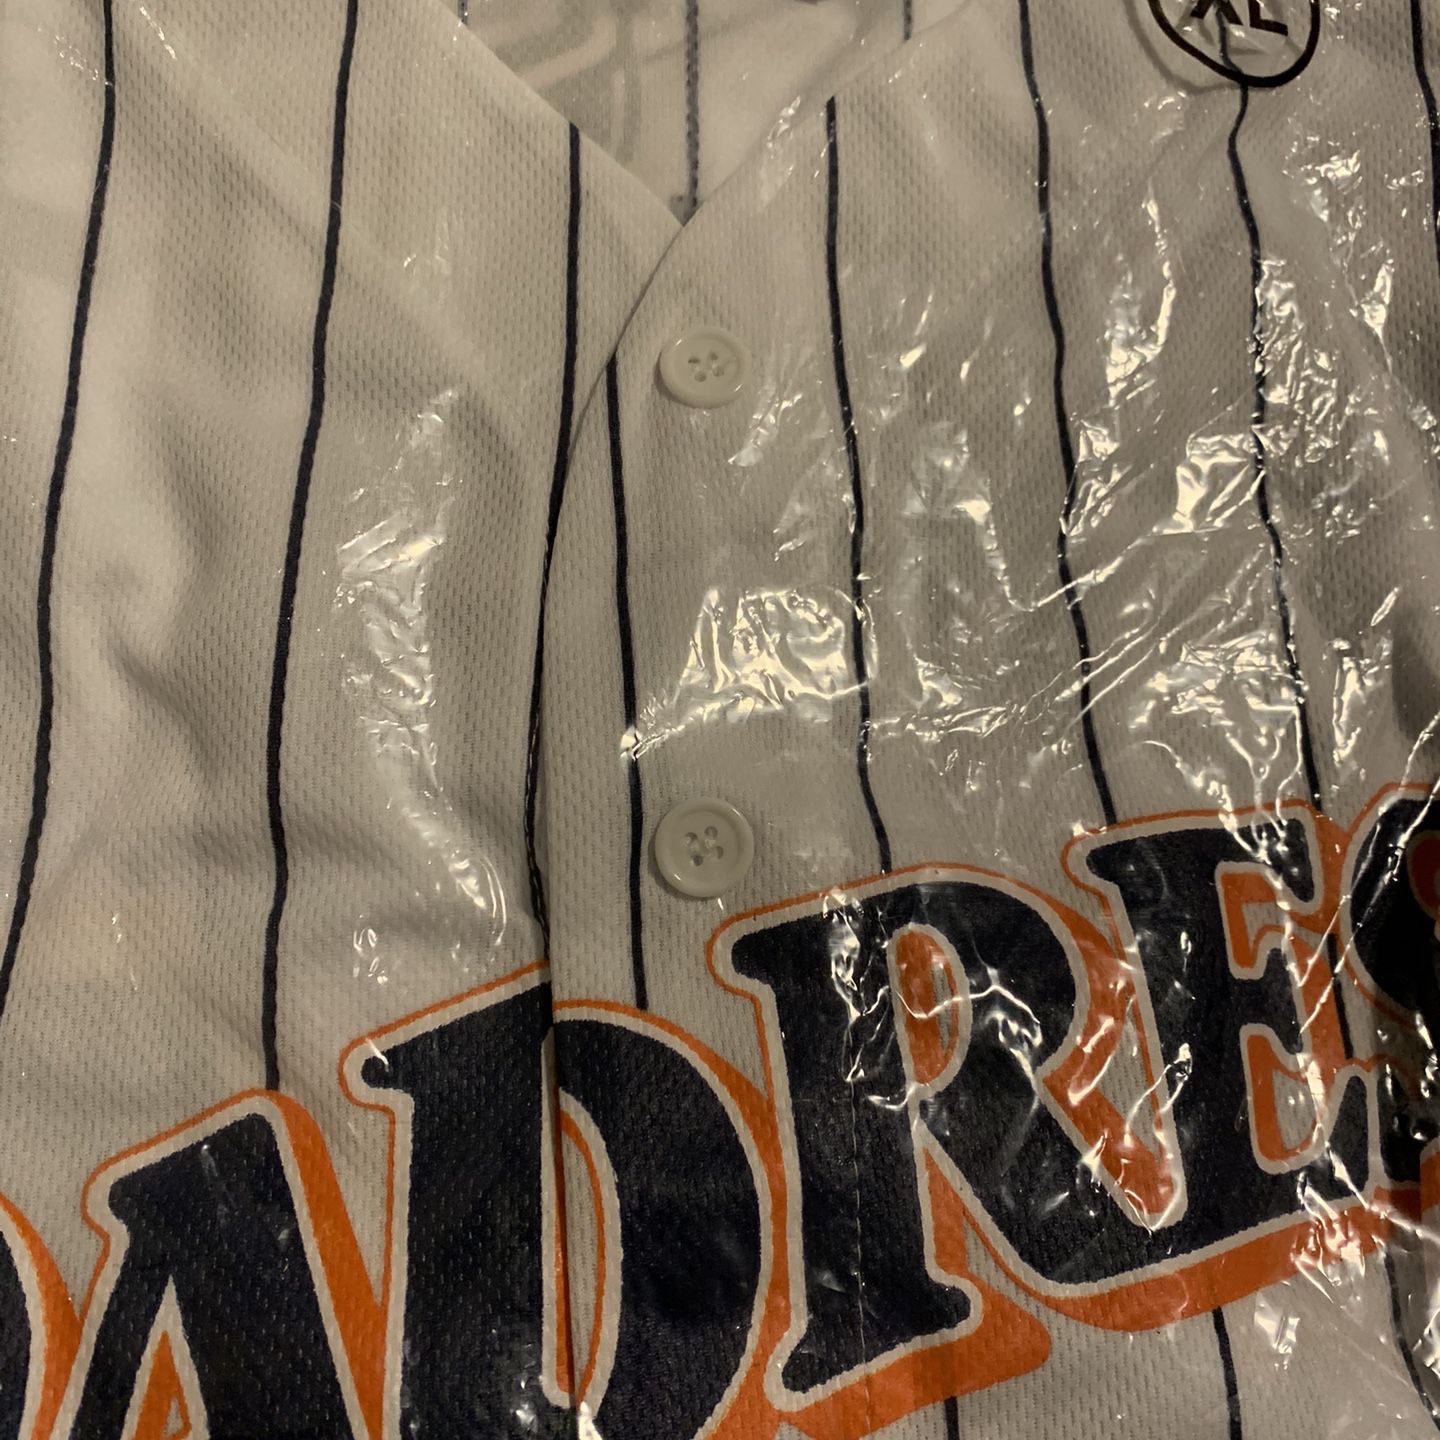 San Diego Padres promotional Ken Caminiti jersey XL for Sale in San Diego,  CA - OfferUp